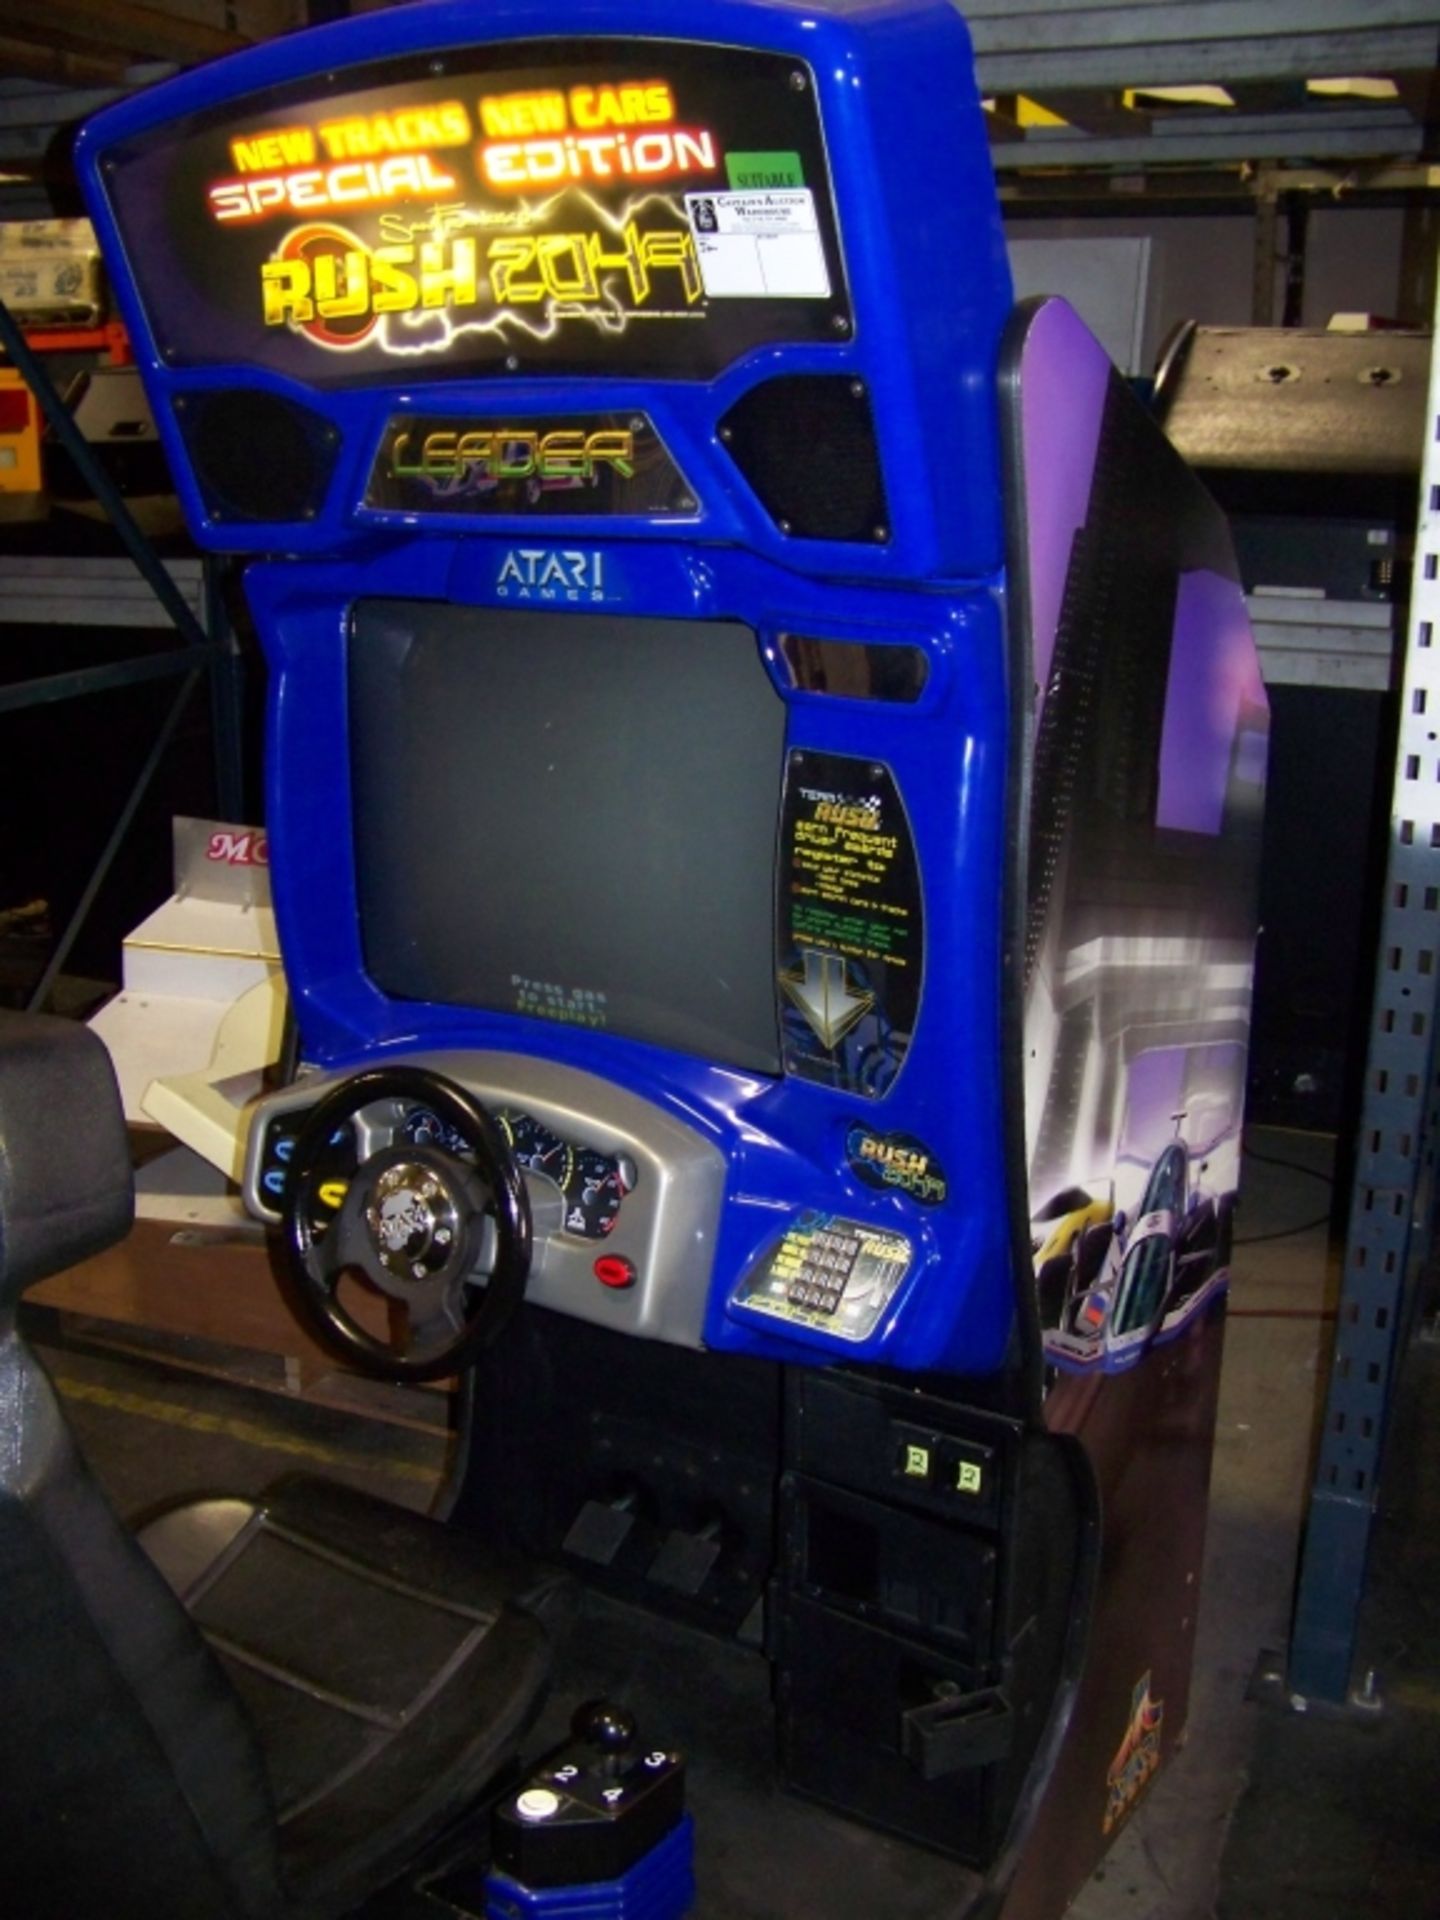 RUSH 2049 SPECIAL ED. RACING ARCADE GAME - Image 4 of 6